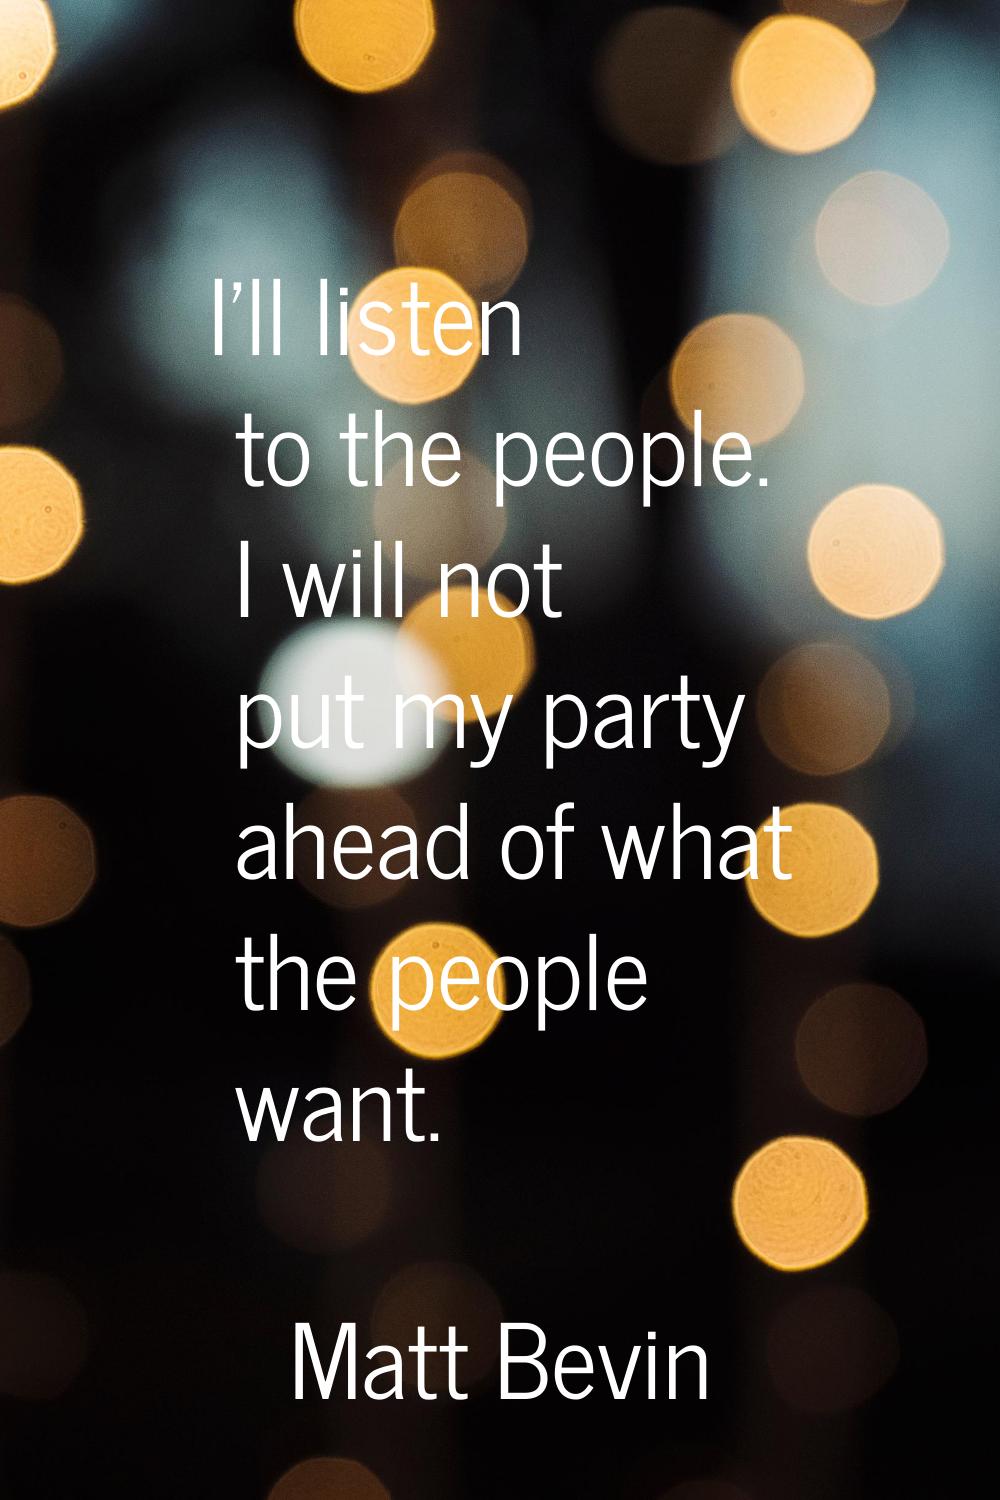 I'll listen to the people. I will not put my party ahead of what the people want.